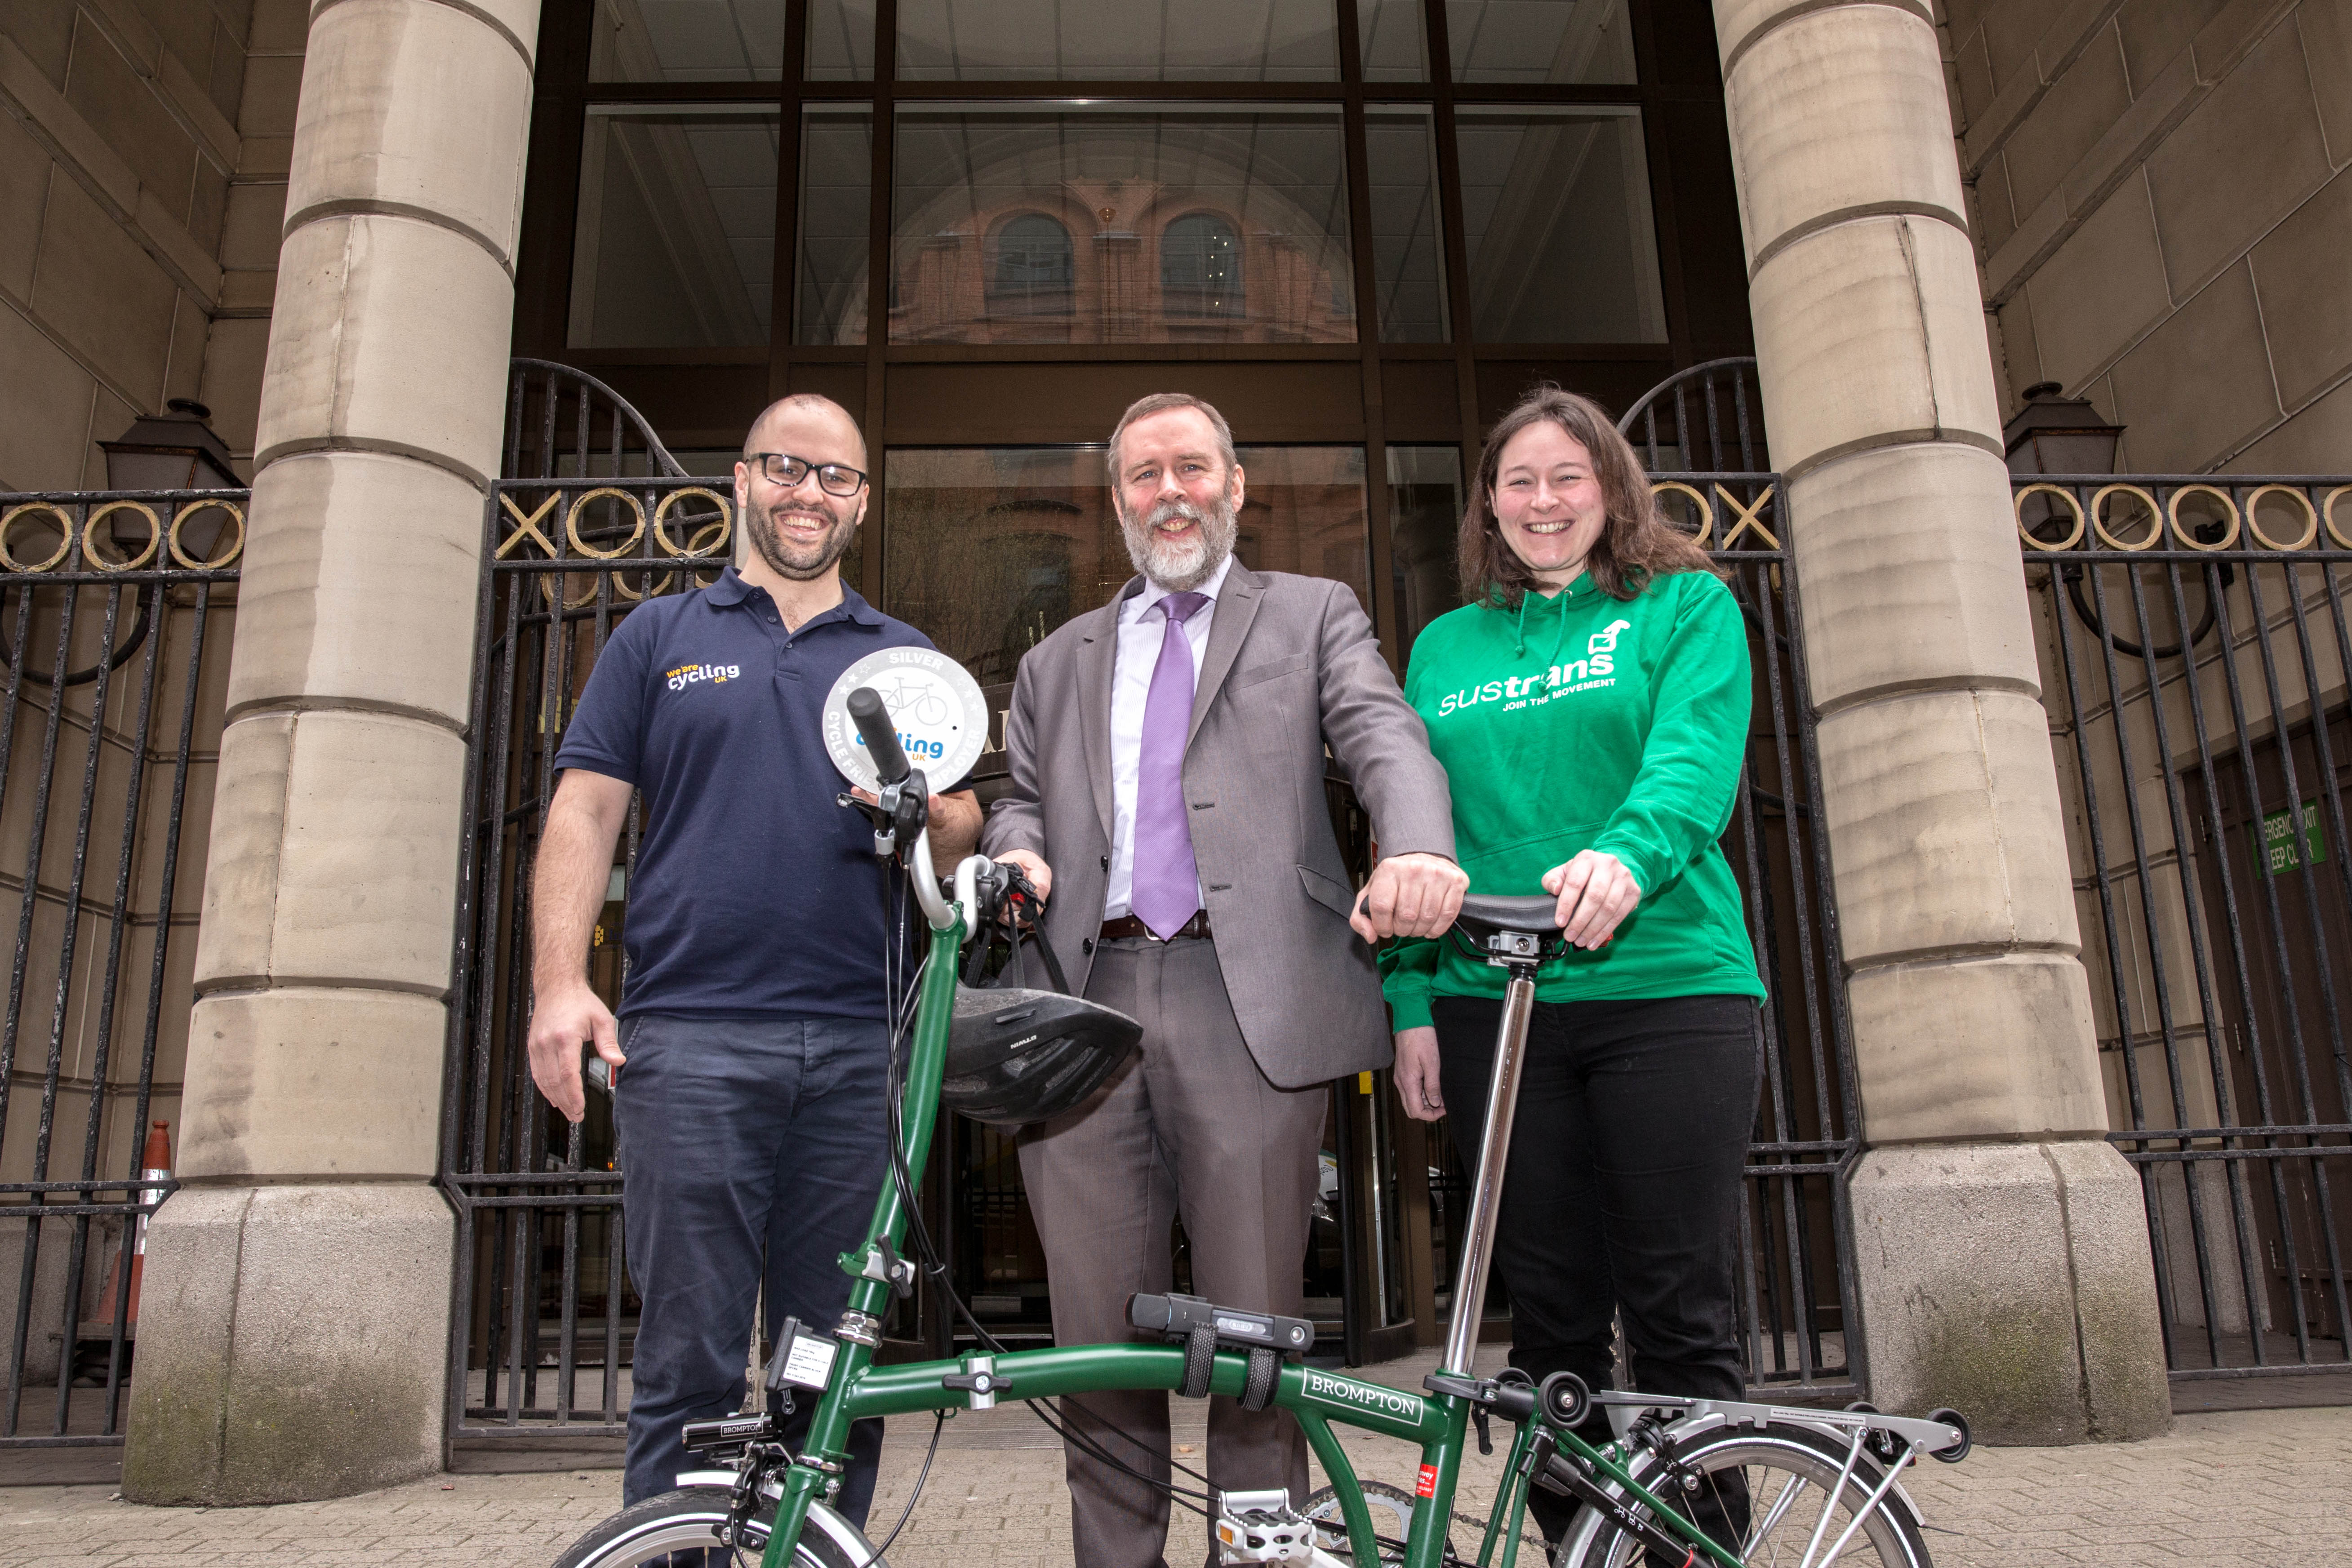 Silver accreditation awarded to the Department for Infrastructure in the Cycle Friendly Employer scheme